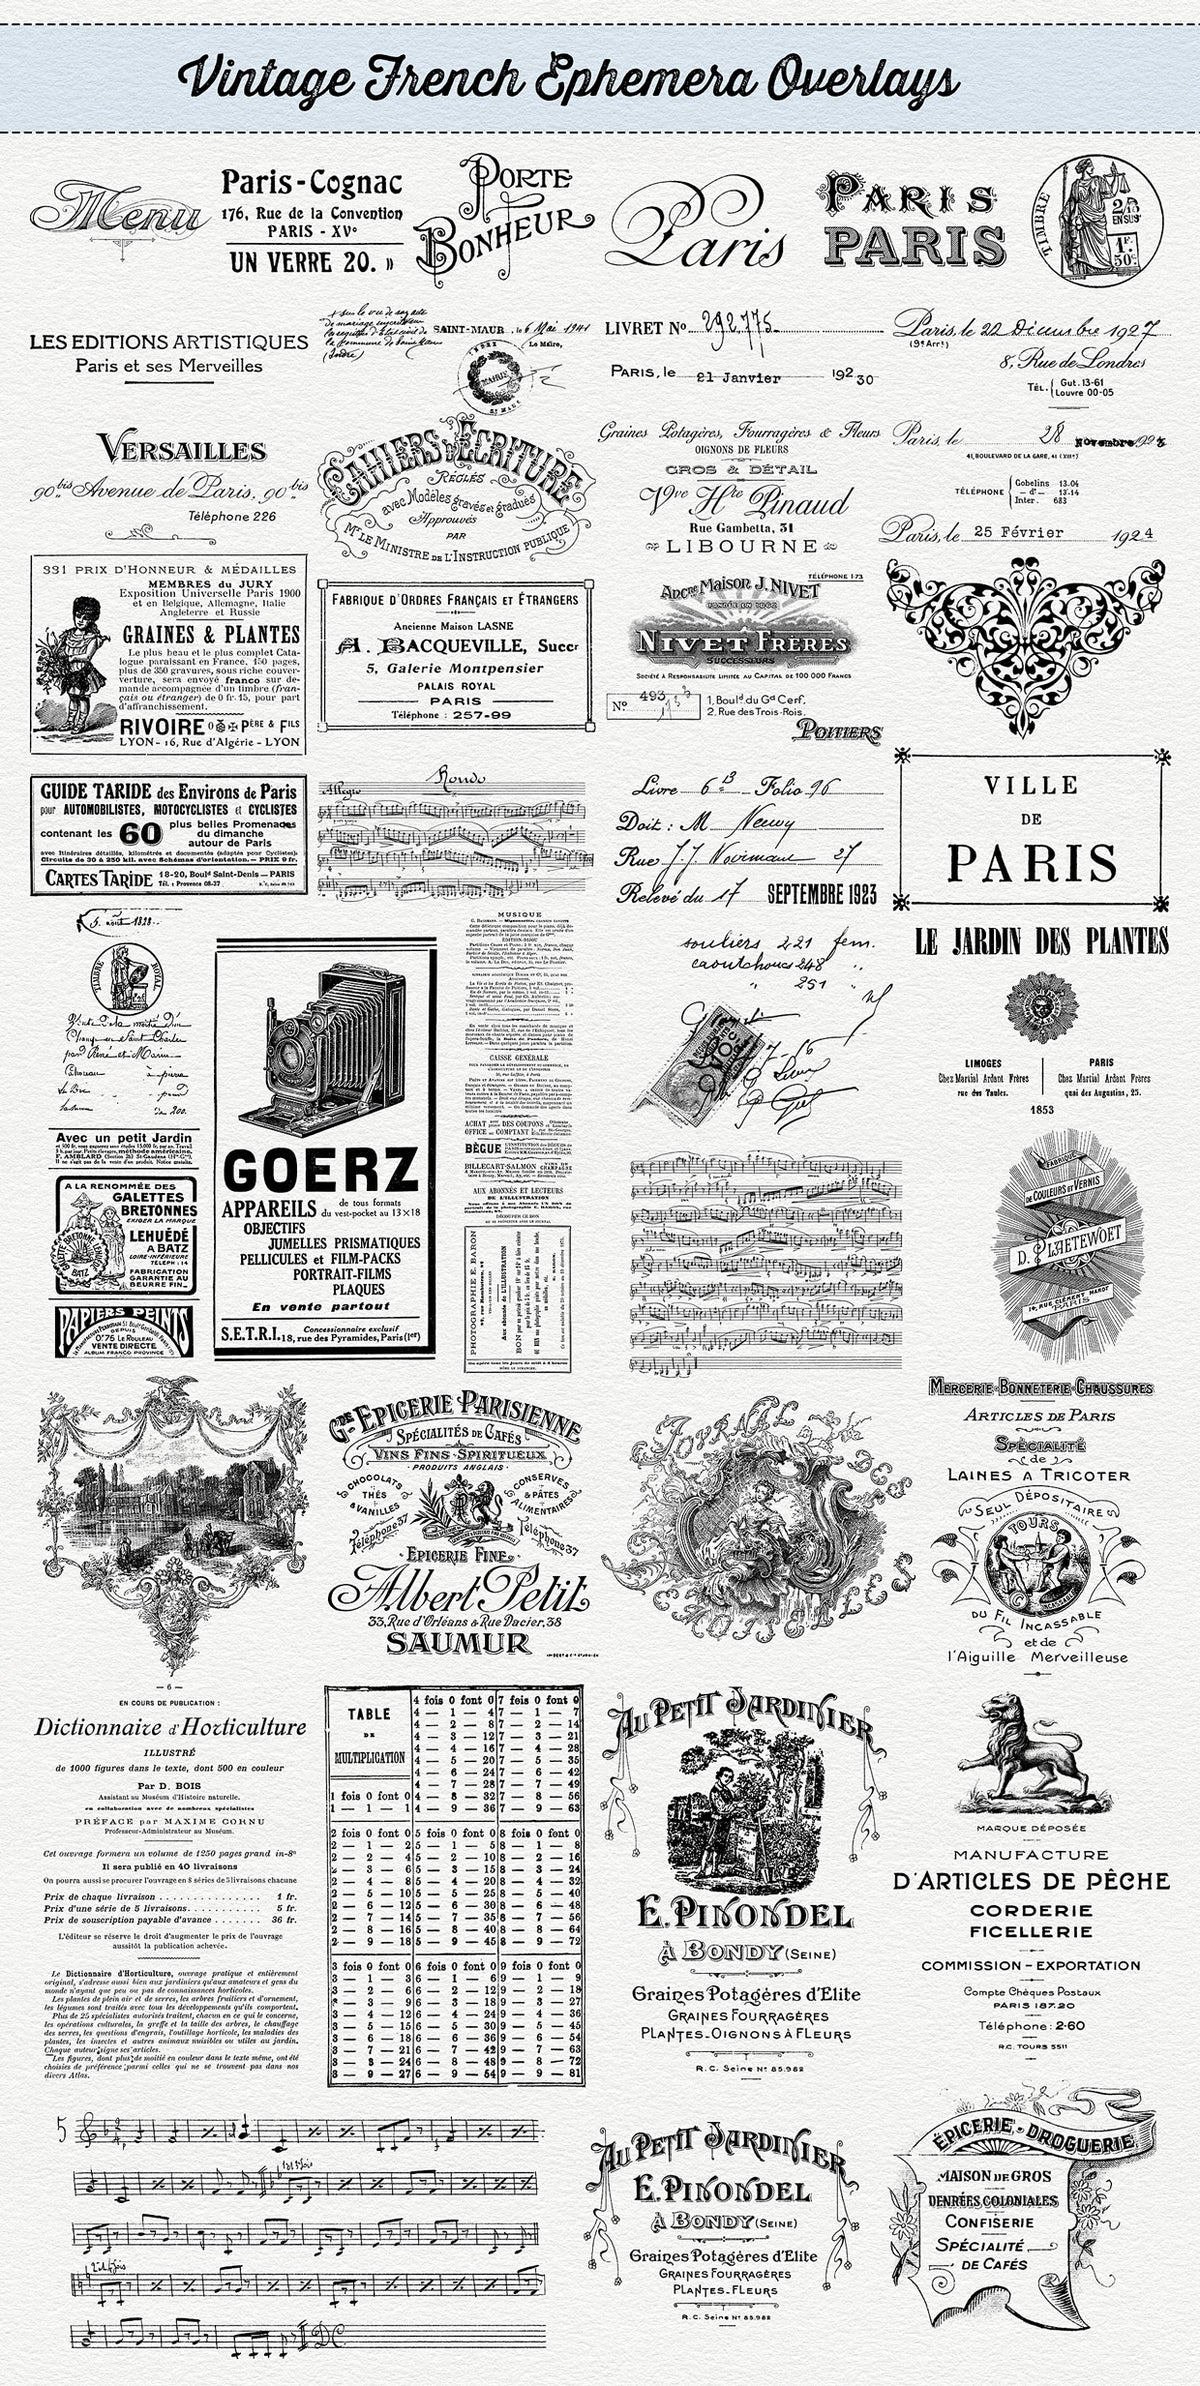 French ephemera overlays from The Essential Vintage French Graphics Collection, part 1.